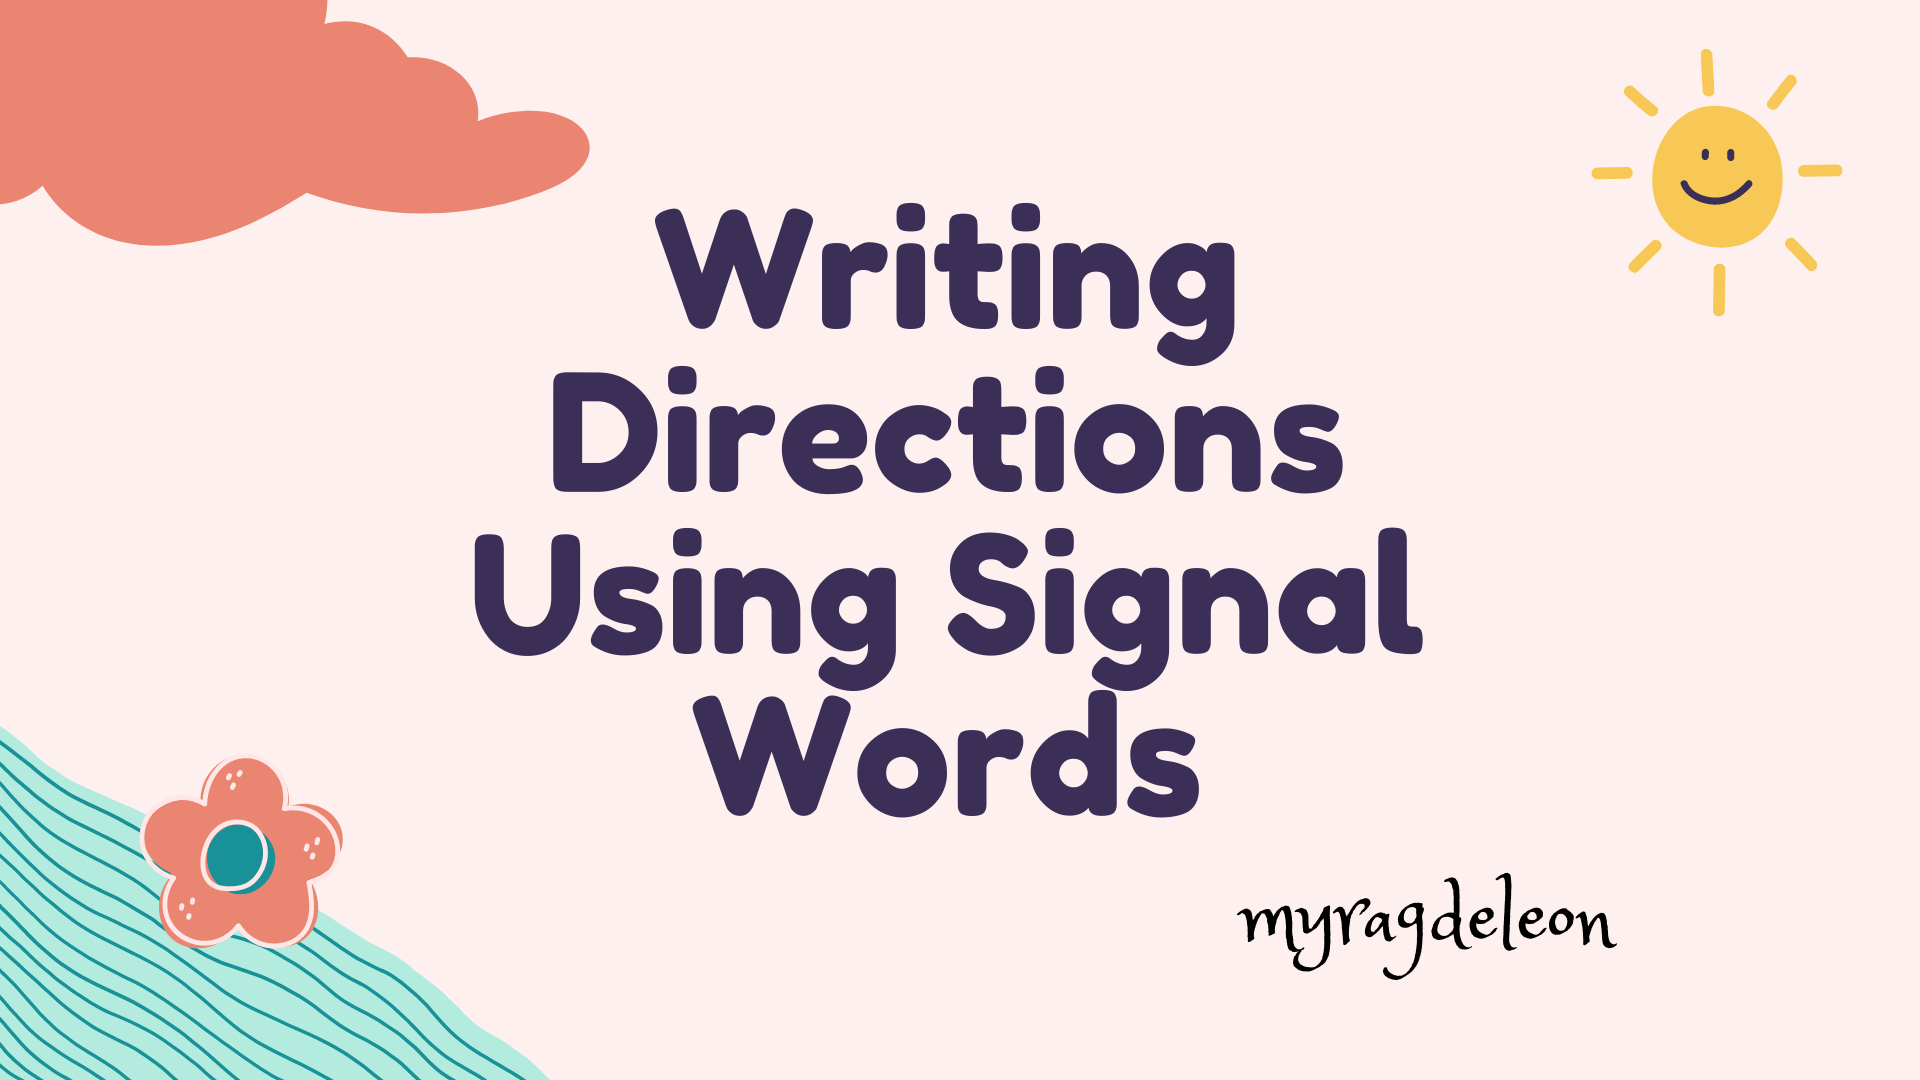 english-writing-directions-using-signal-words-questions-answers-for-quizzes-and-worksheets